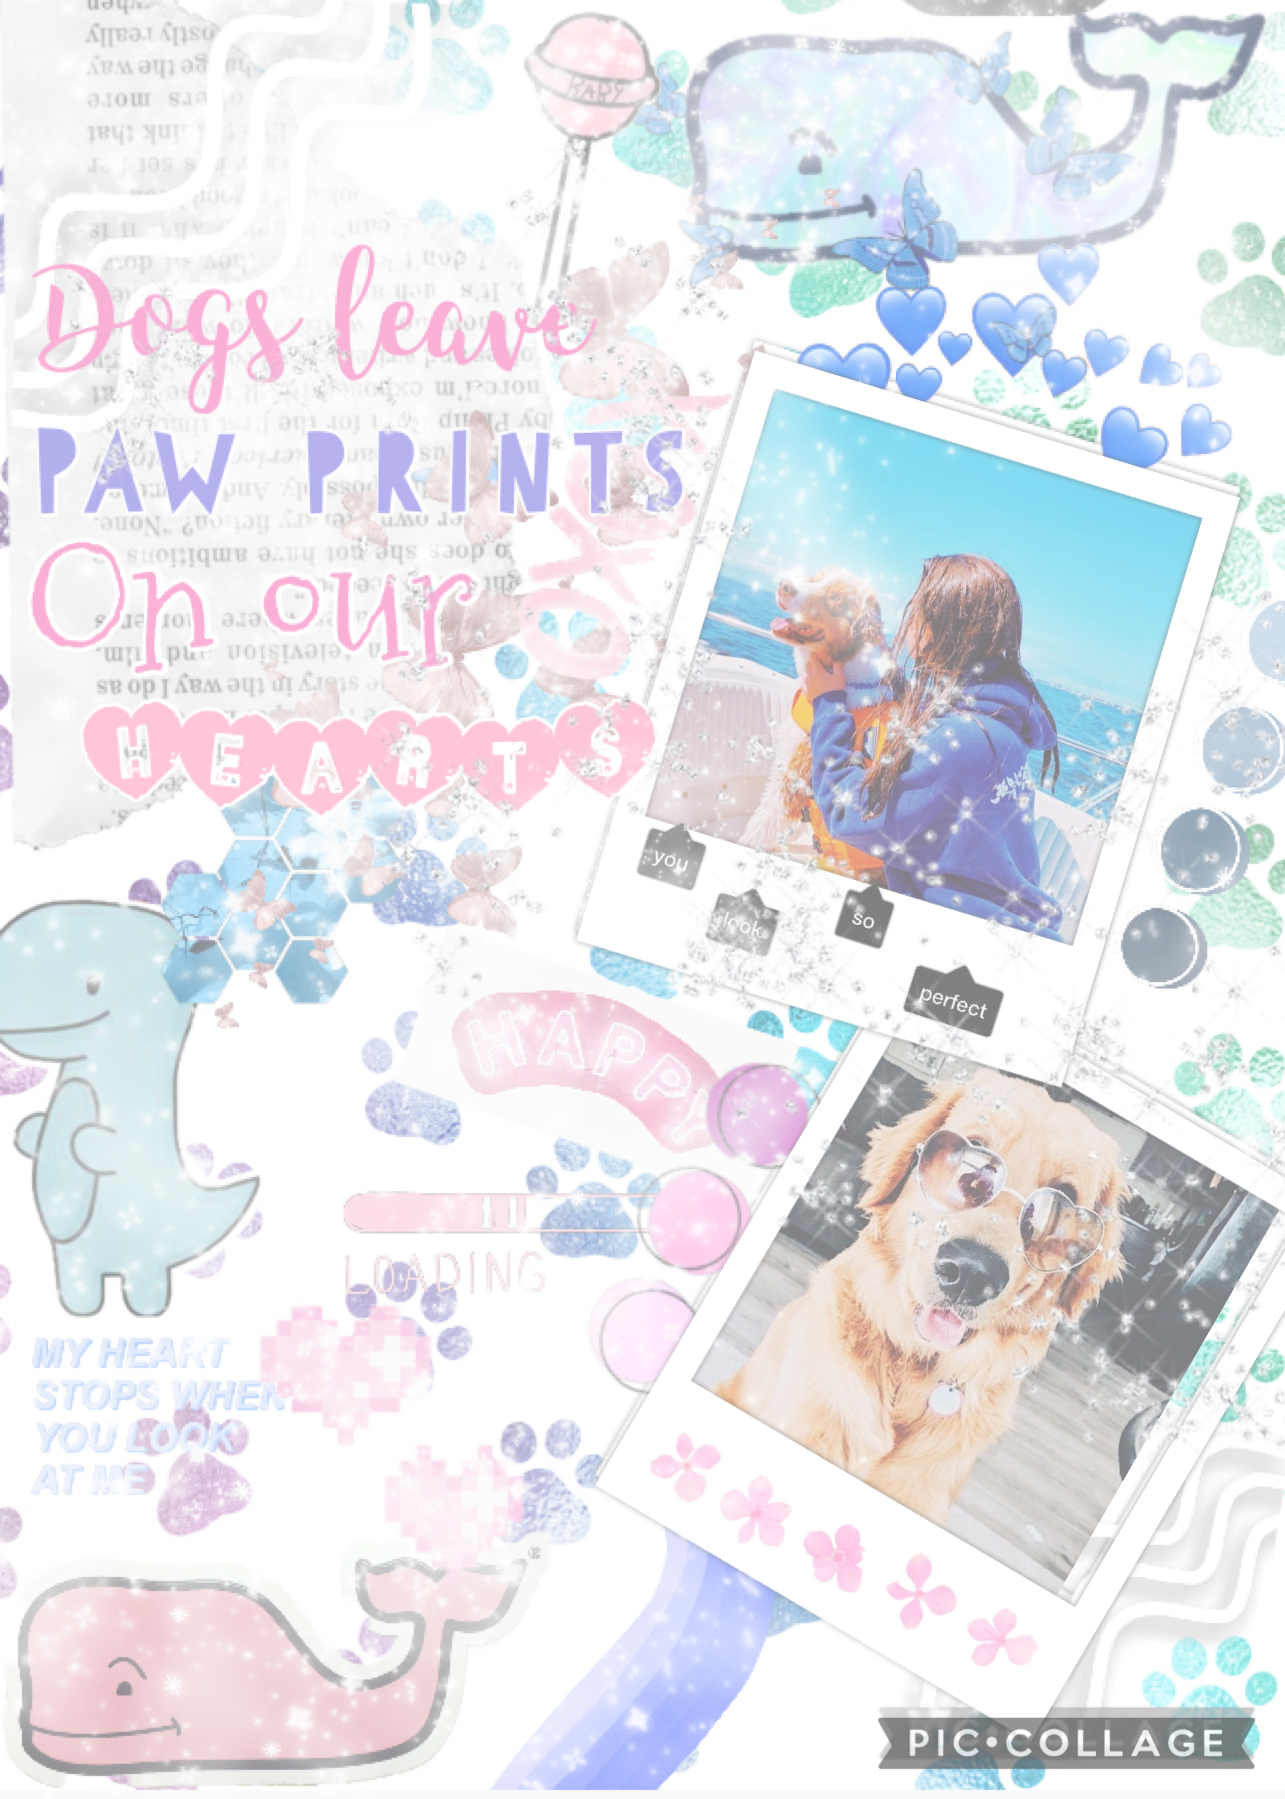 🐾TAP🐾
I loveeeeeeee dogs! I’ve done one of these before, but with deleting  all my post is like to give creds to @dreaminghappily Bec she did a stunning dog post recently! Qotd: what r ur three fav types of dogs 🐕 aotd: Aussie, baby bulldog(they’re actual